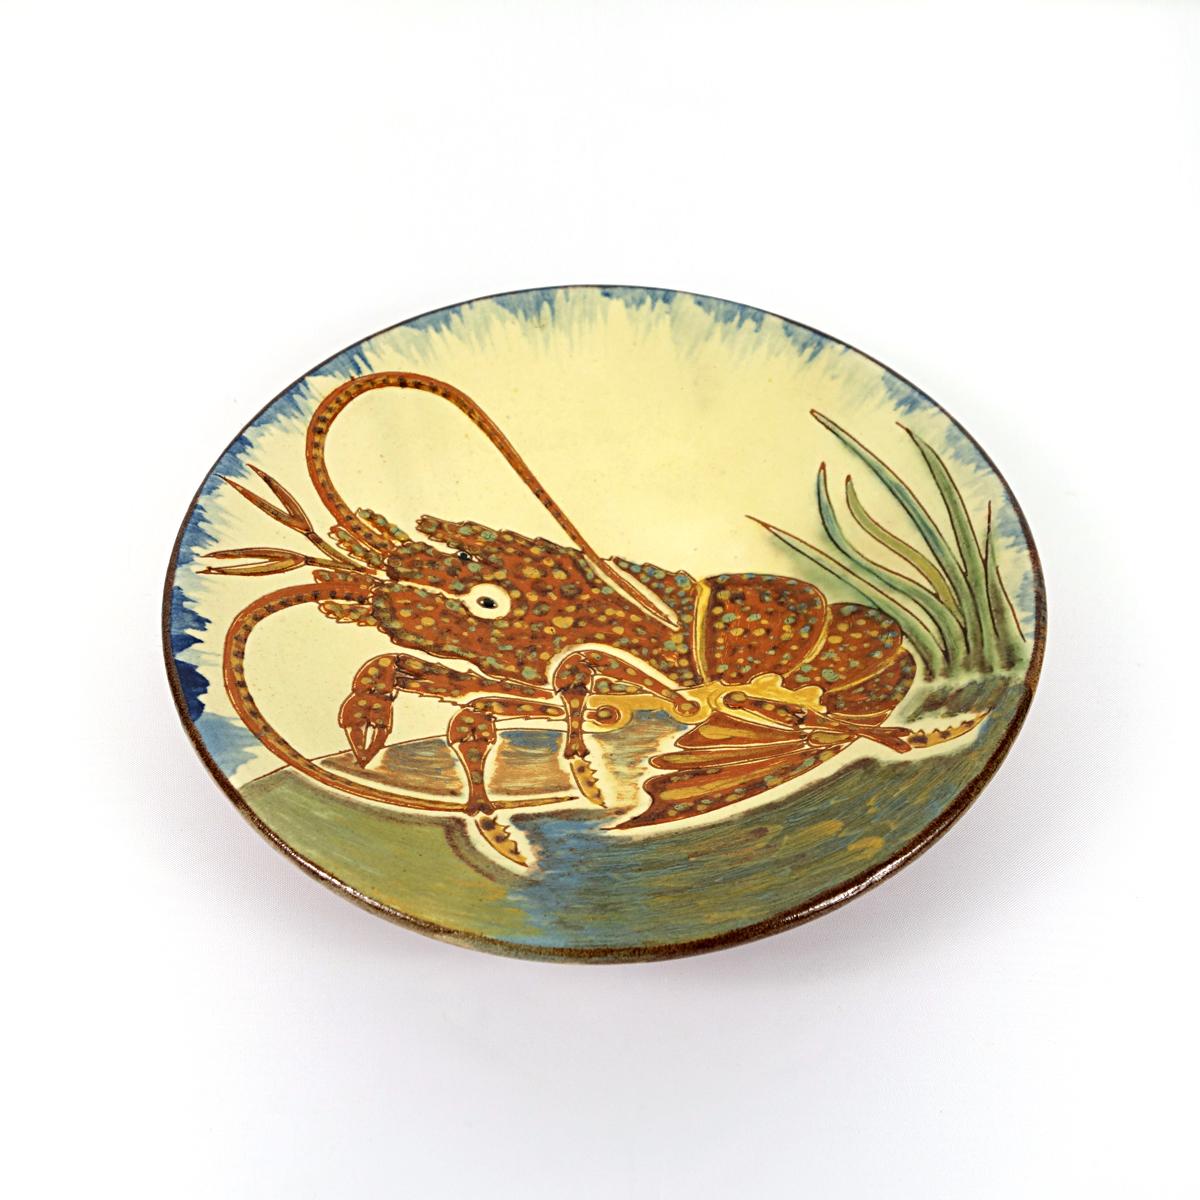 Very colorful and decorative wall plate with a stylized lobster.
Designed and made by Puigdemont of Spain.
 